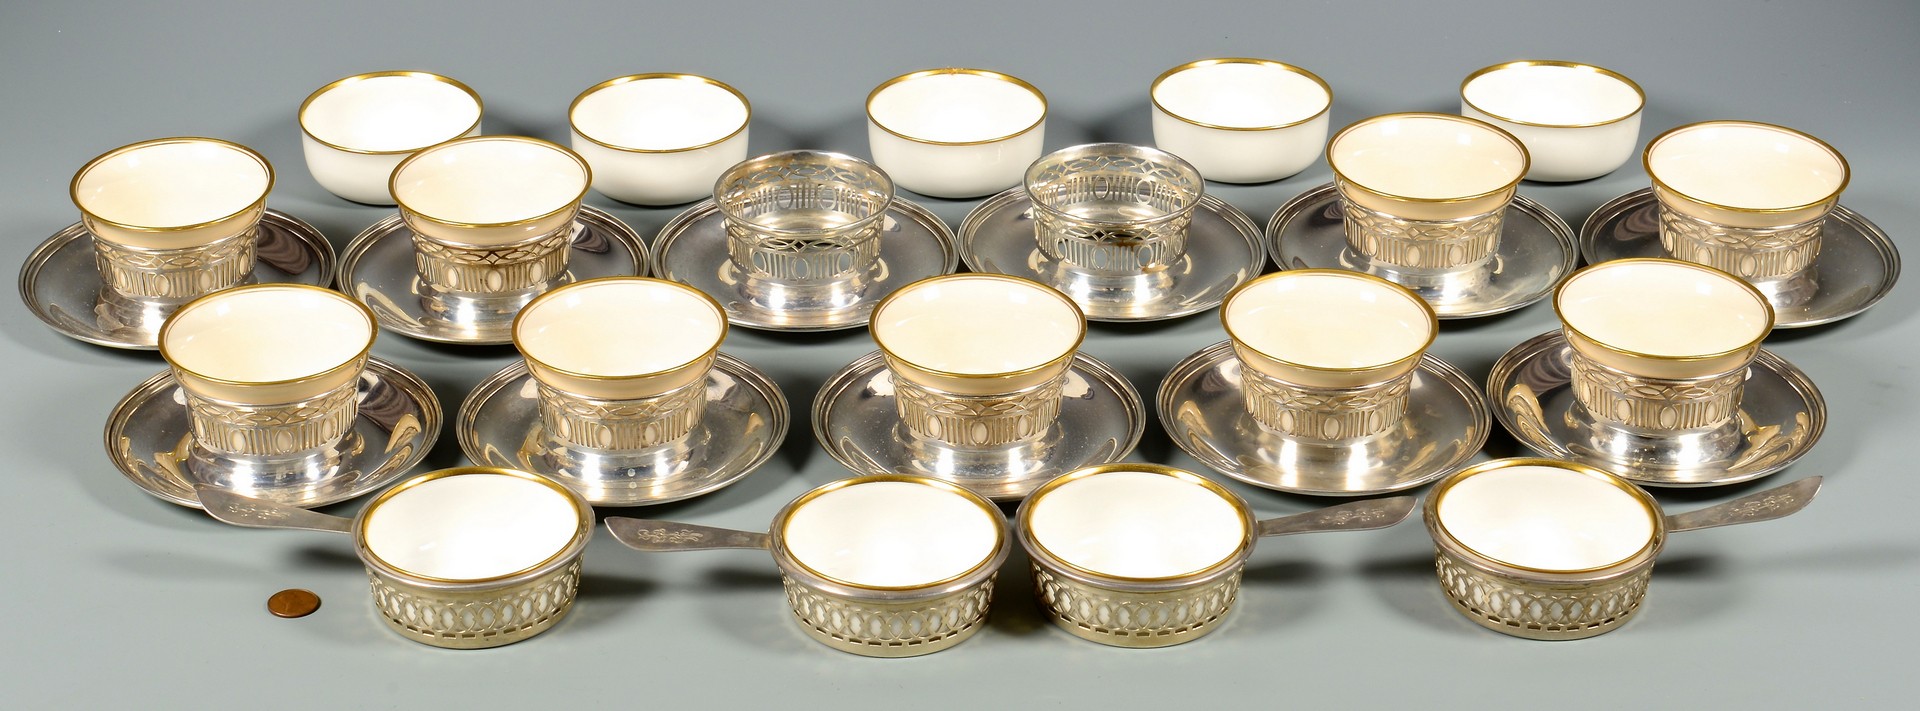 Lot 338: 15 Sterling Cup Holders w/ Porcelain Liners